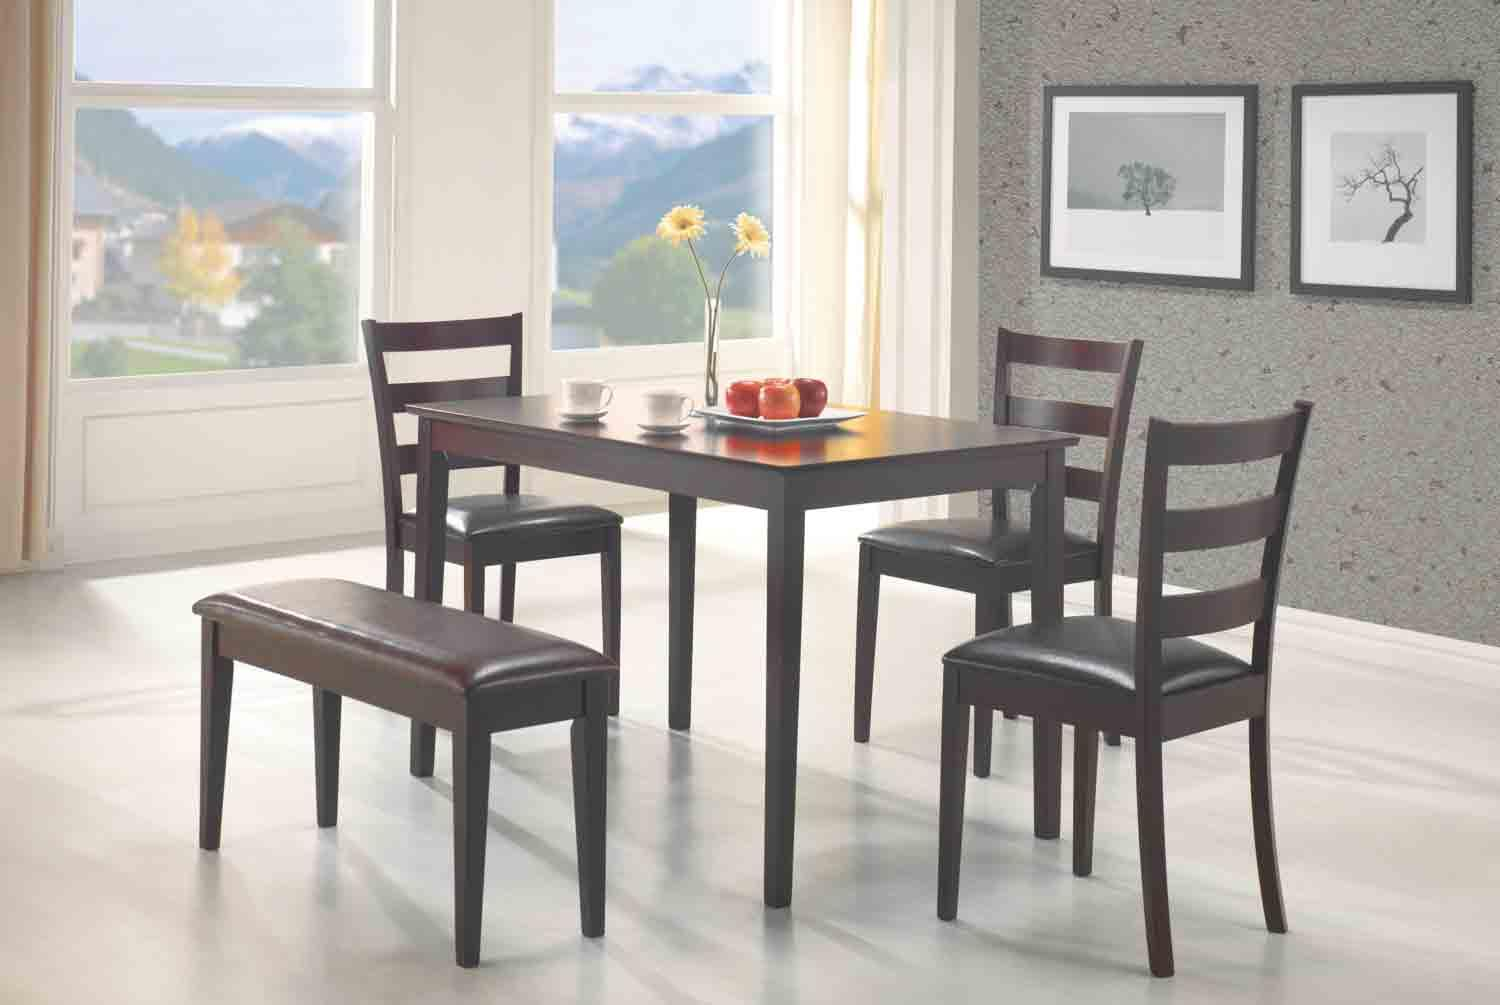 Coaster Taraval 5pc Dining Room Set intended for sizing 1500 X 1005